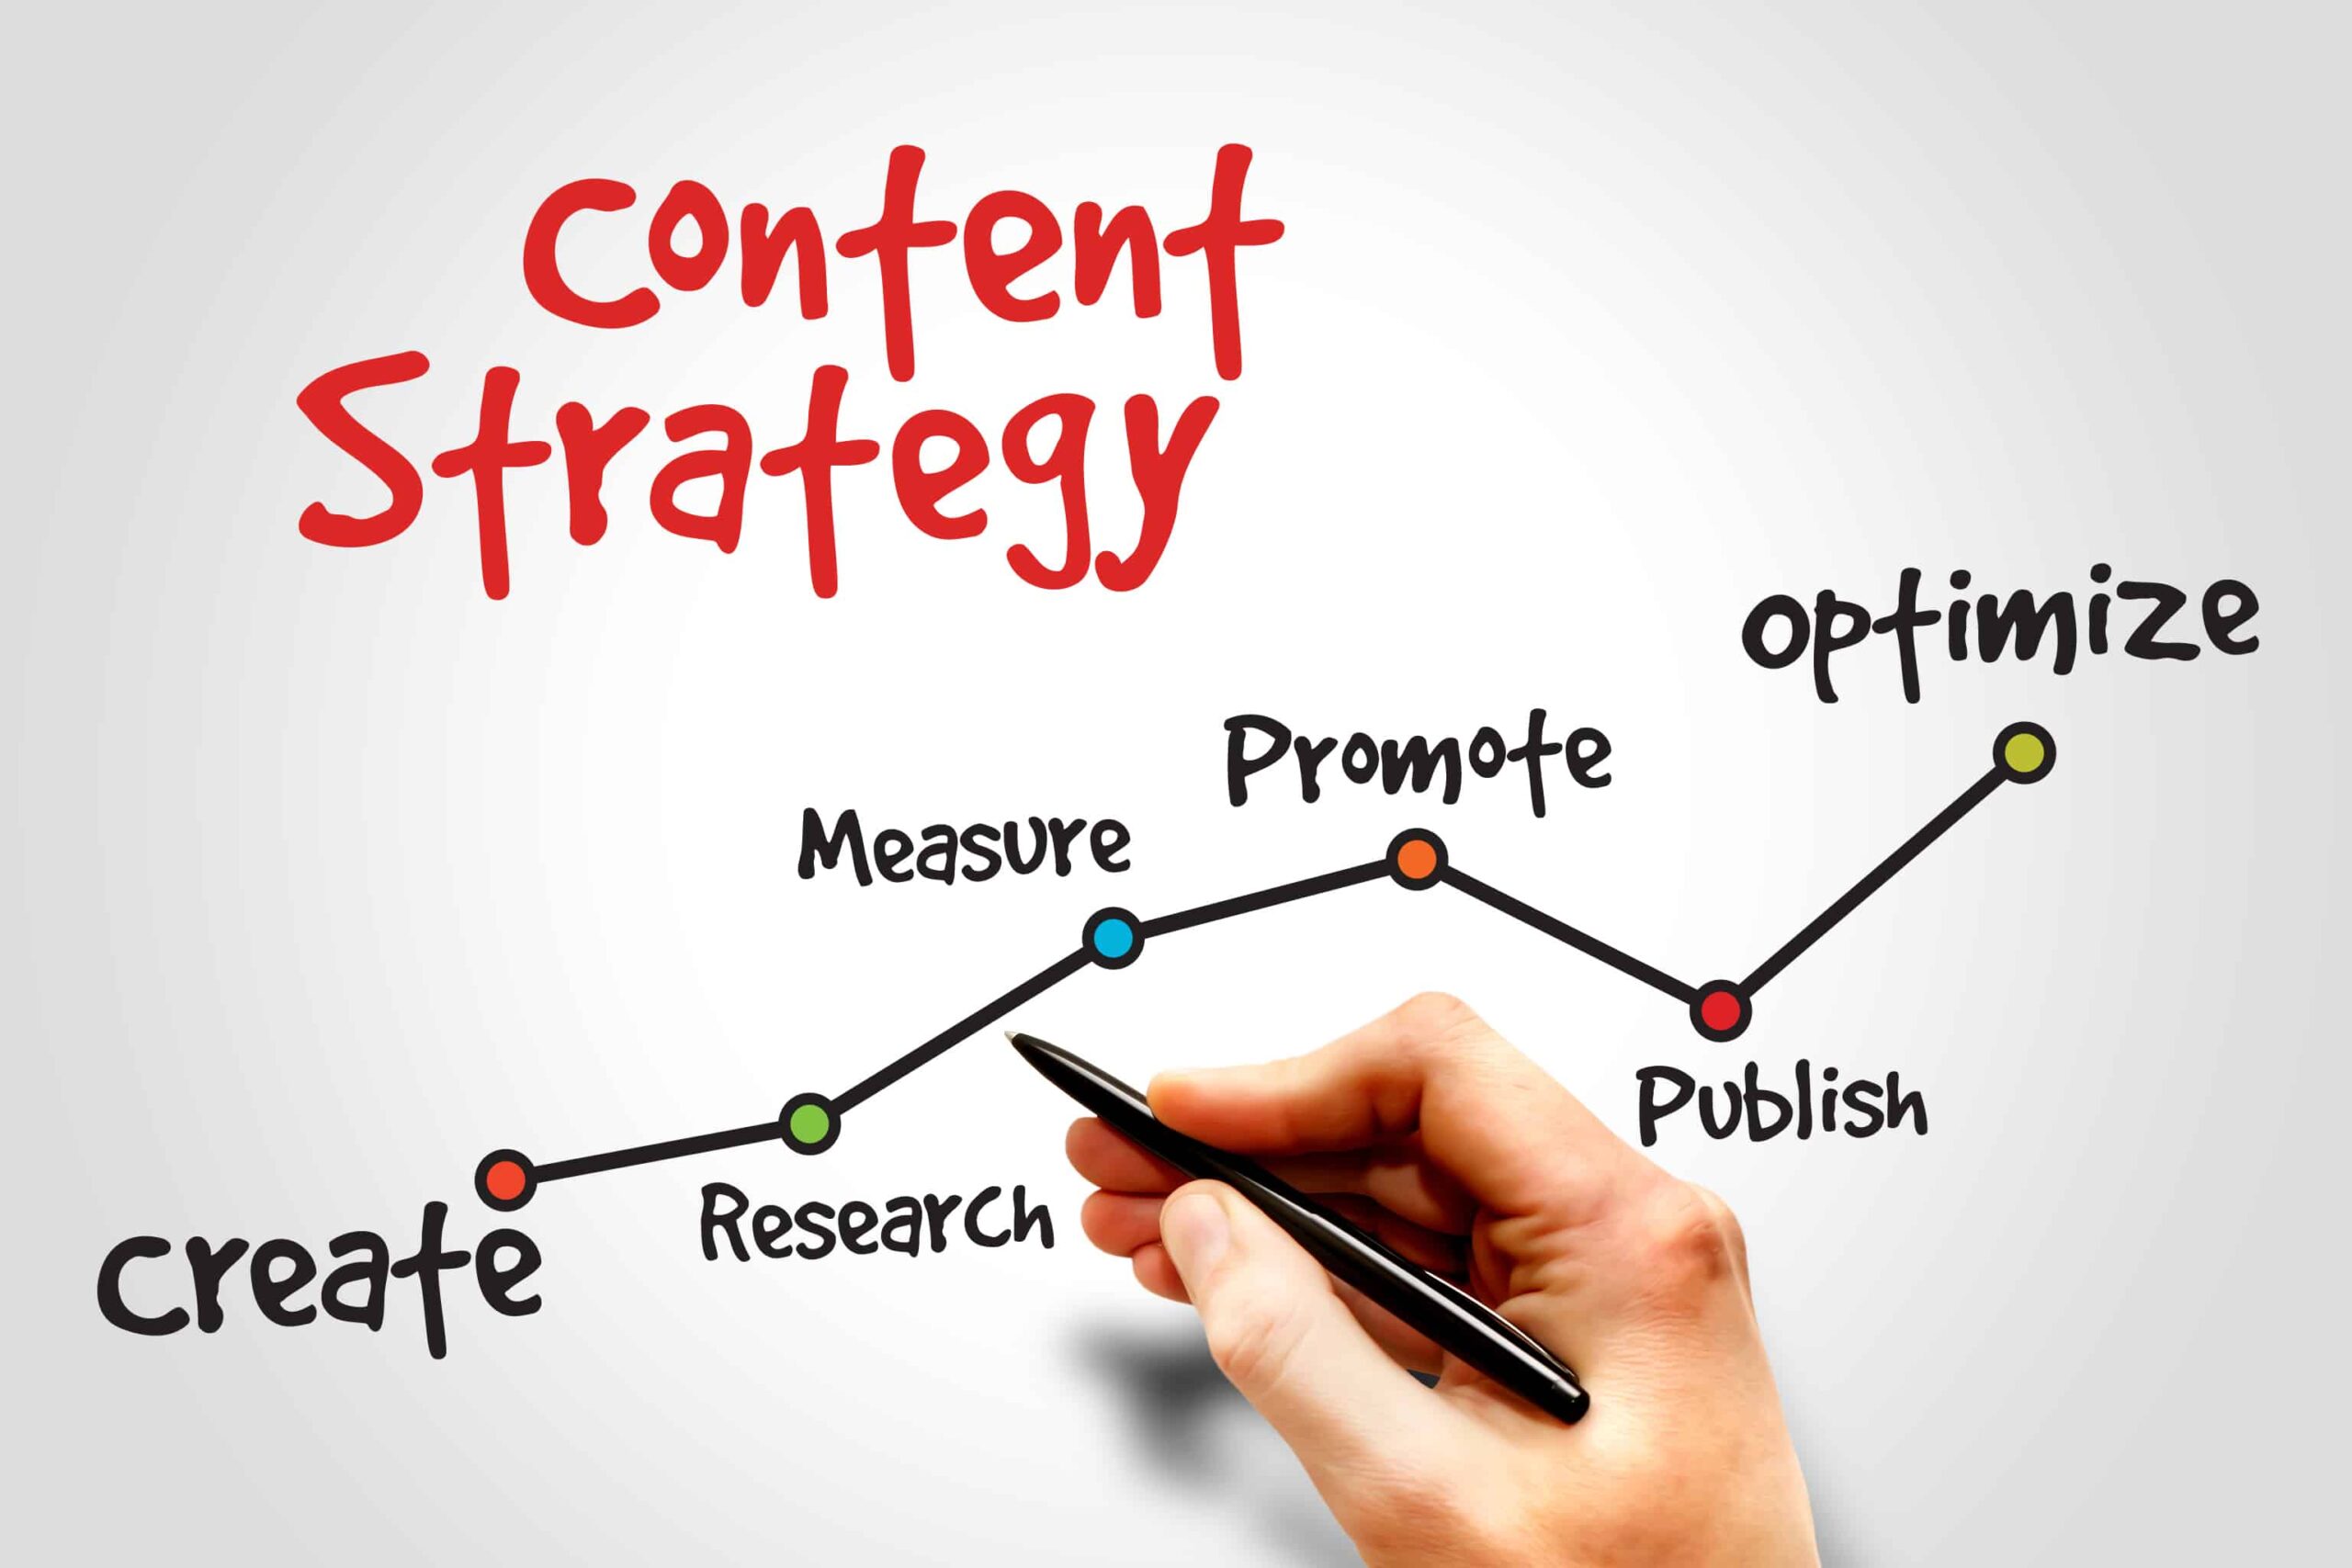 What are the Most Important Elements of a Content Strategy?